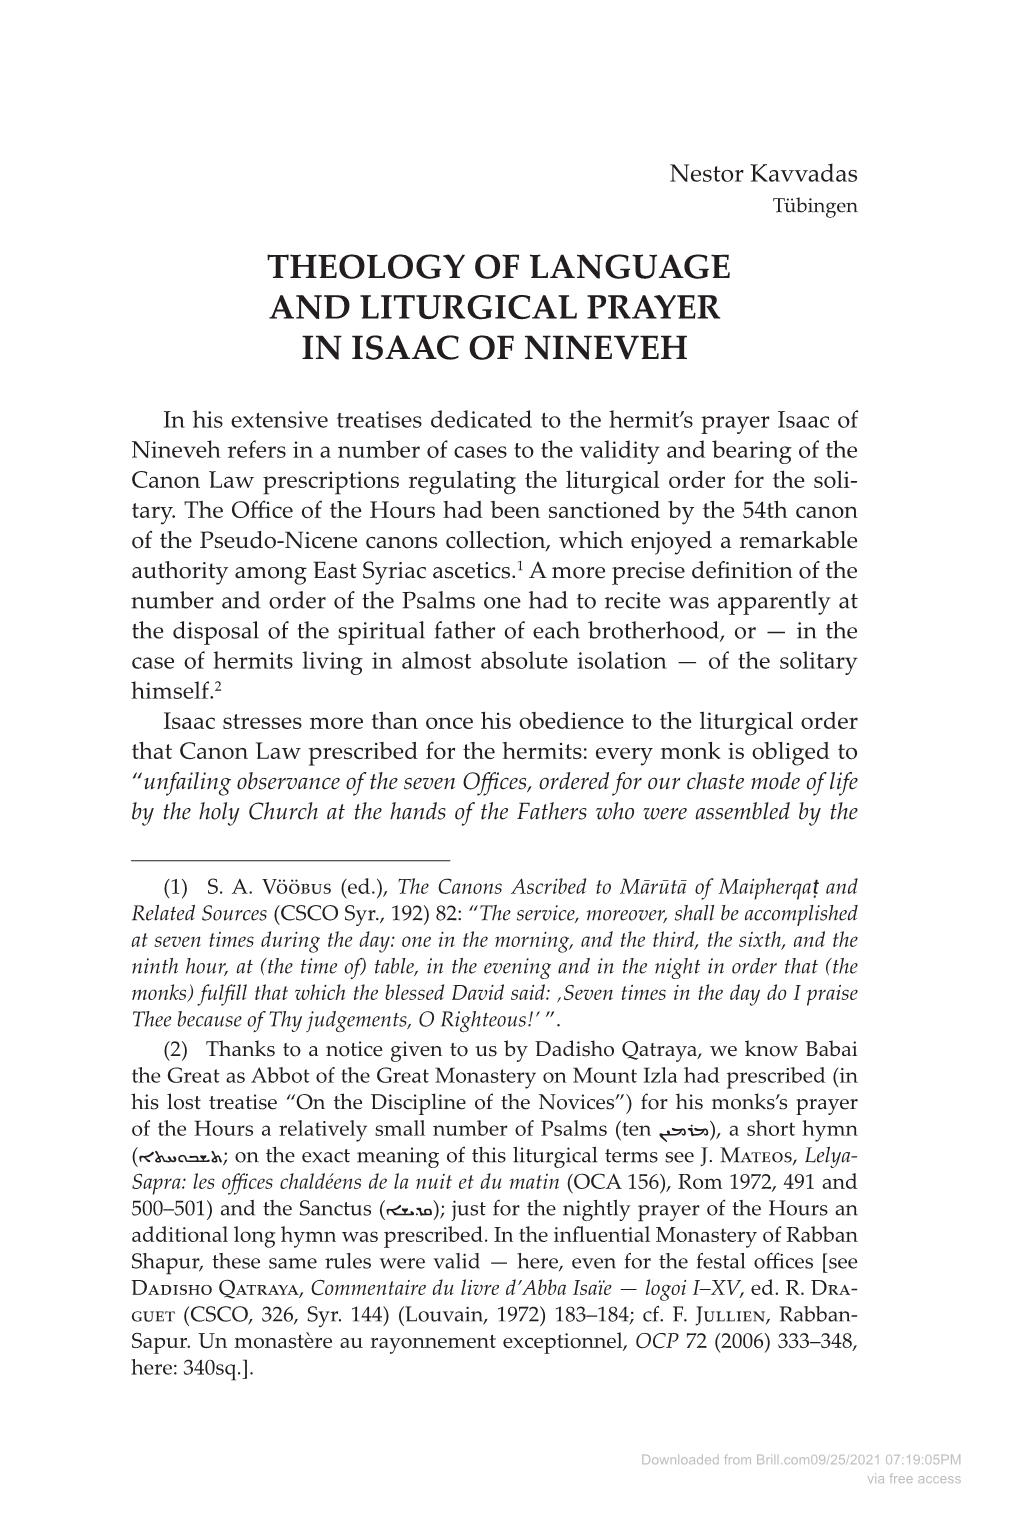 Theology of Language and Liturgical Prayer in Isaac of Nineveh